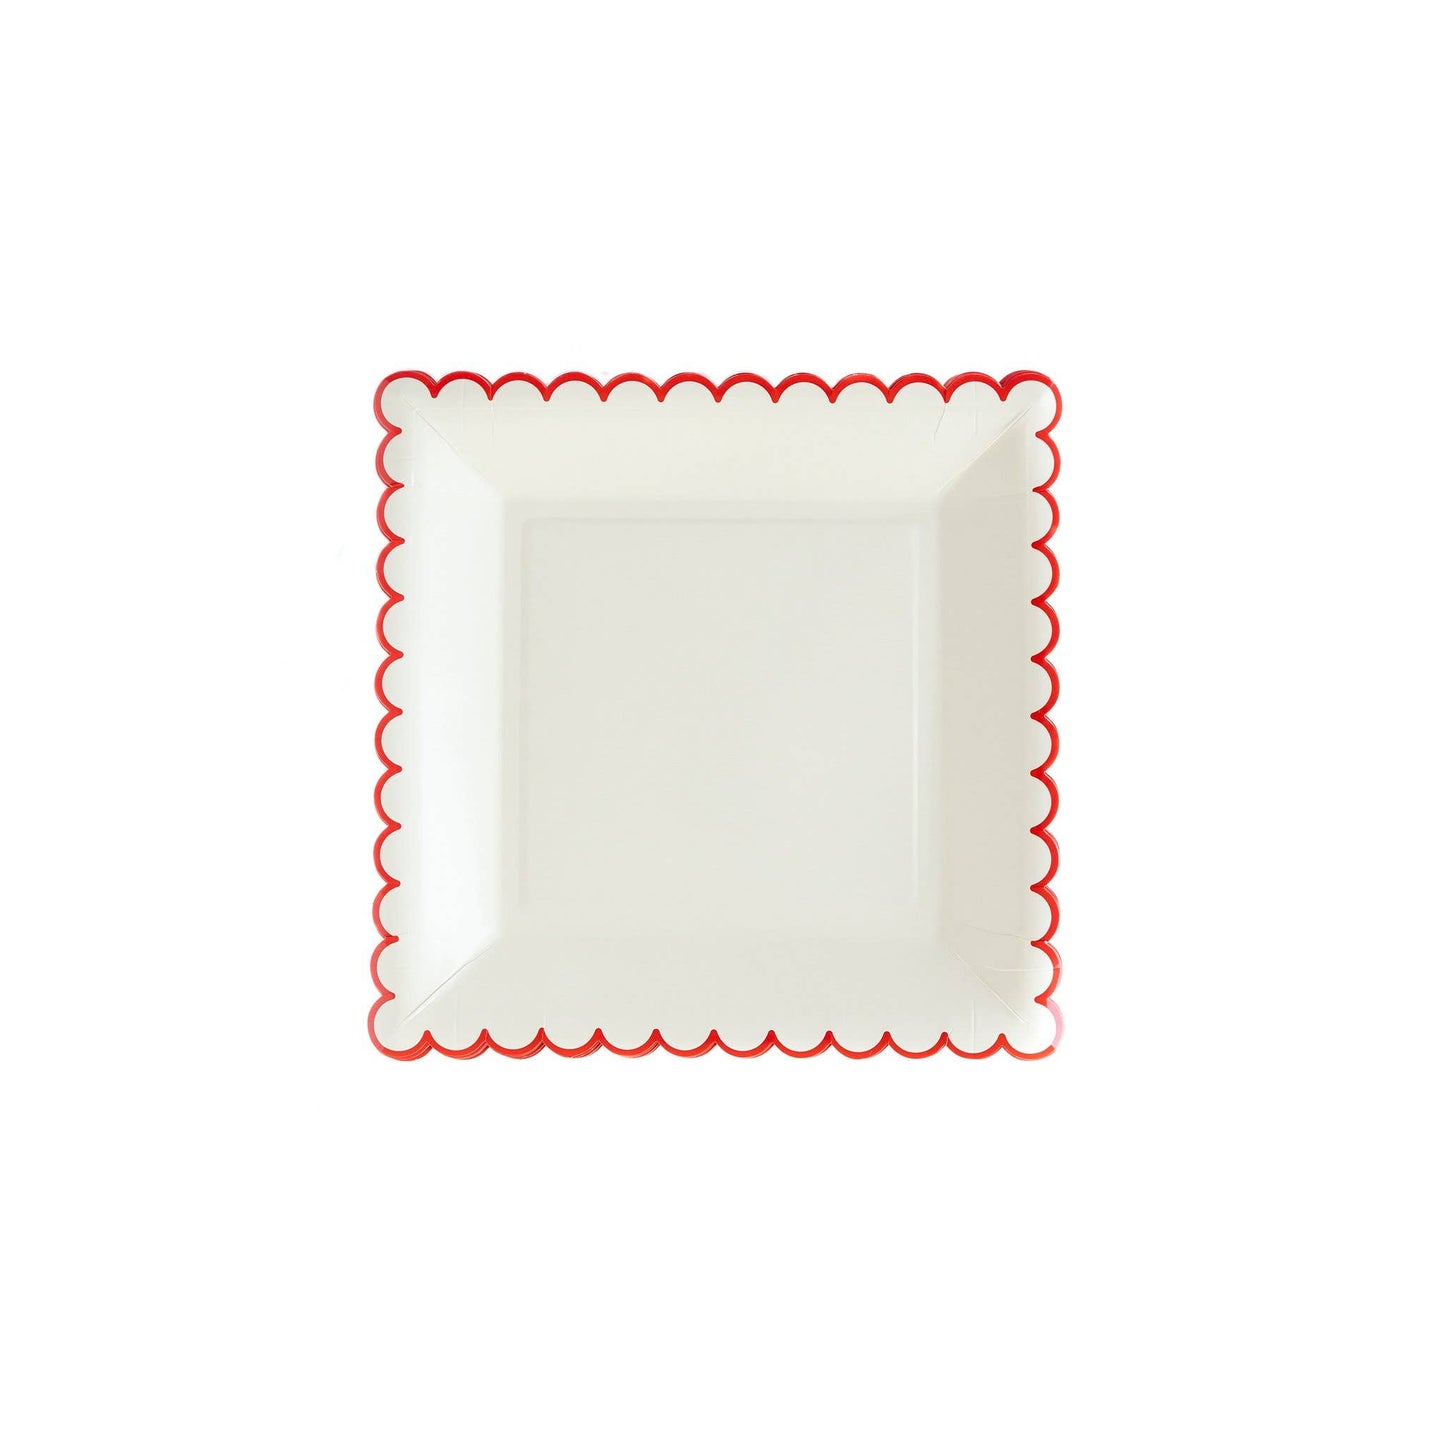 BEC849 - Believe White/Red Scallop 9" Plate- 8ct